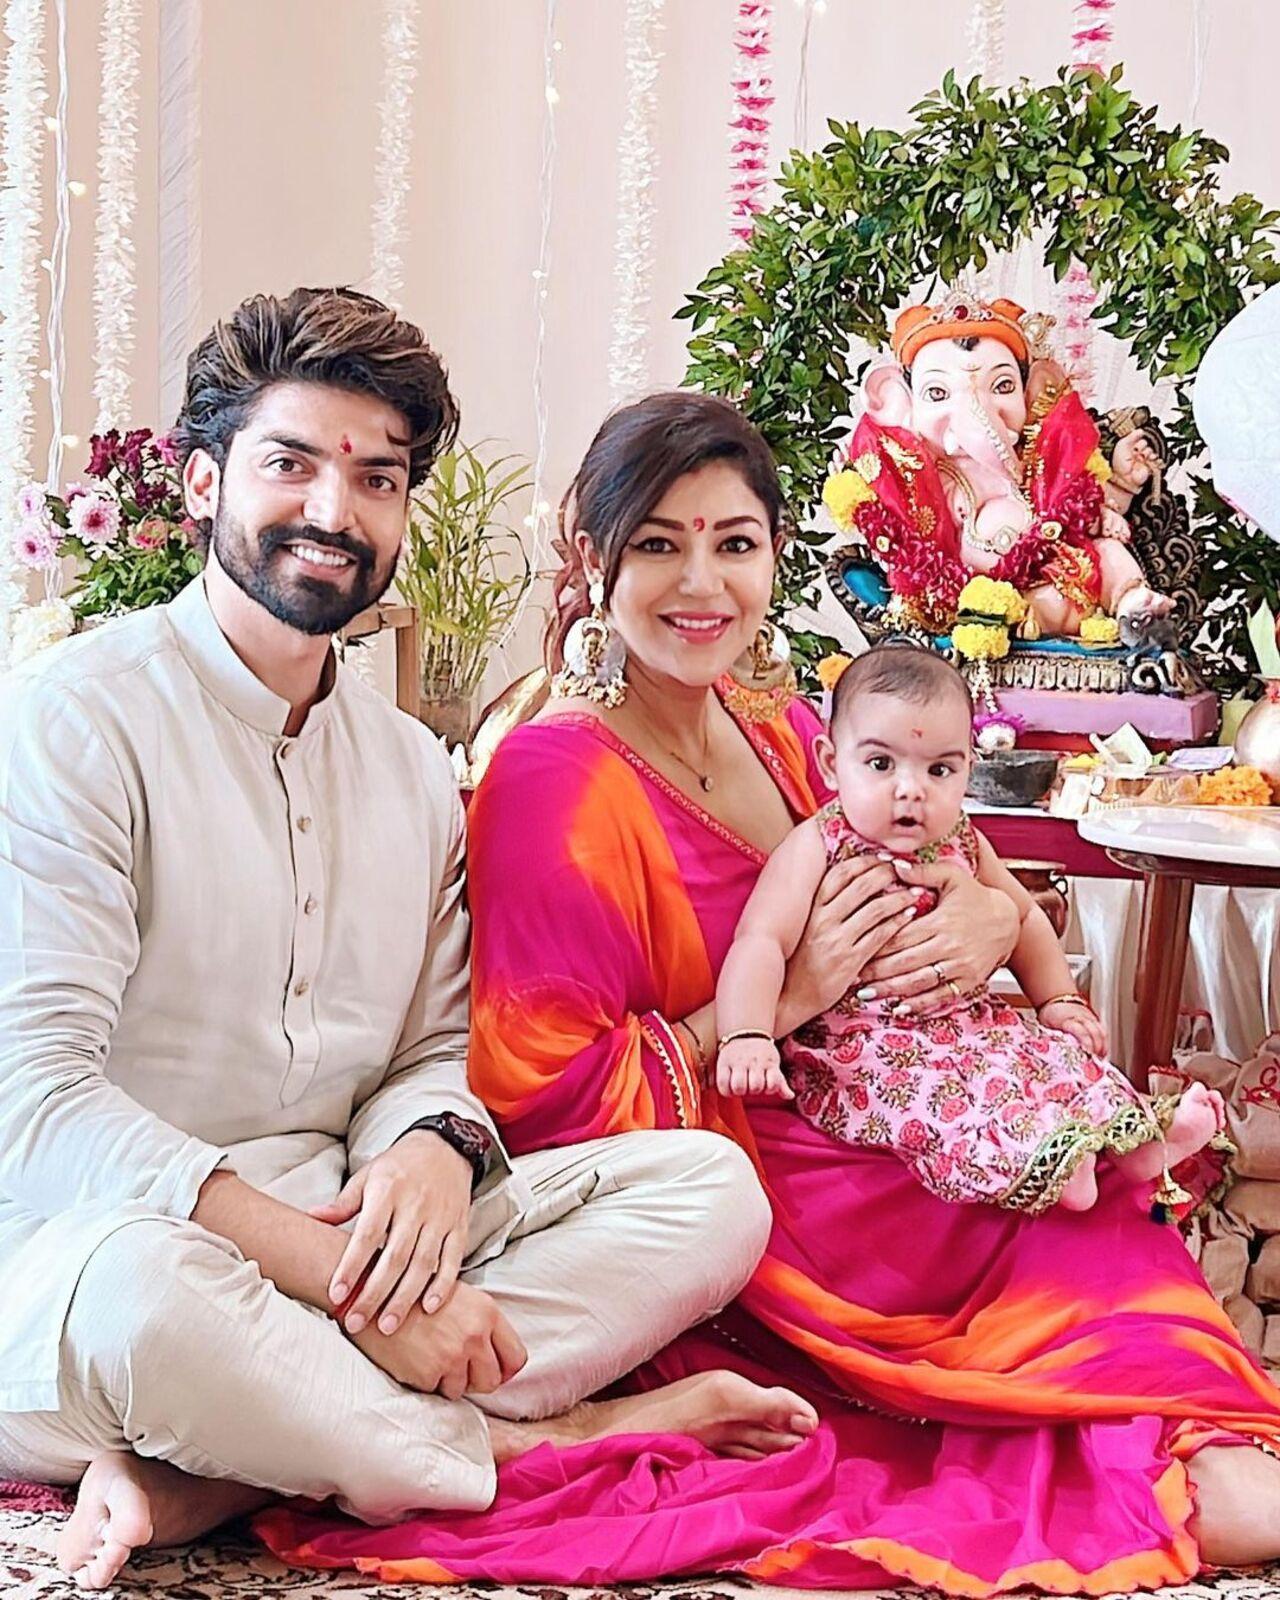 Gurmeet Choudhary and Debina Bonnerjee have an annual celebration at home. They welcome Ganpati with enthusiasm